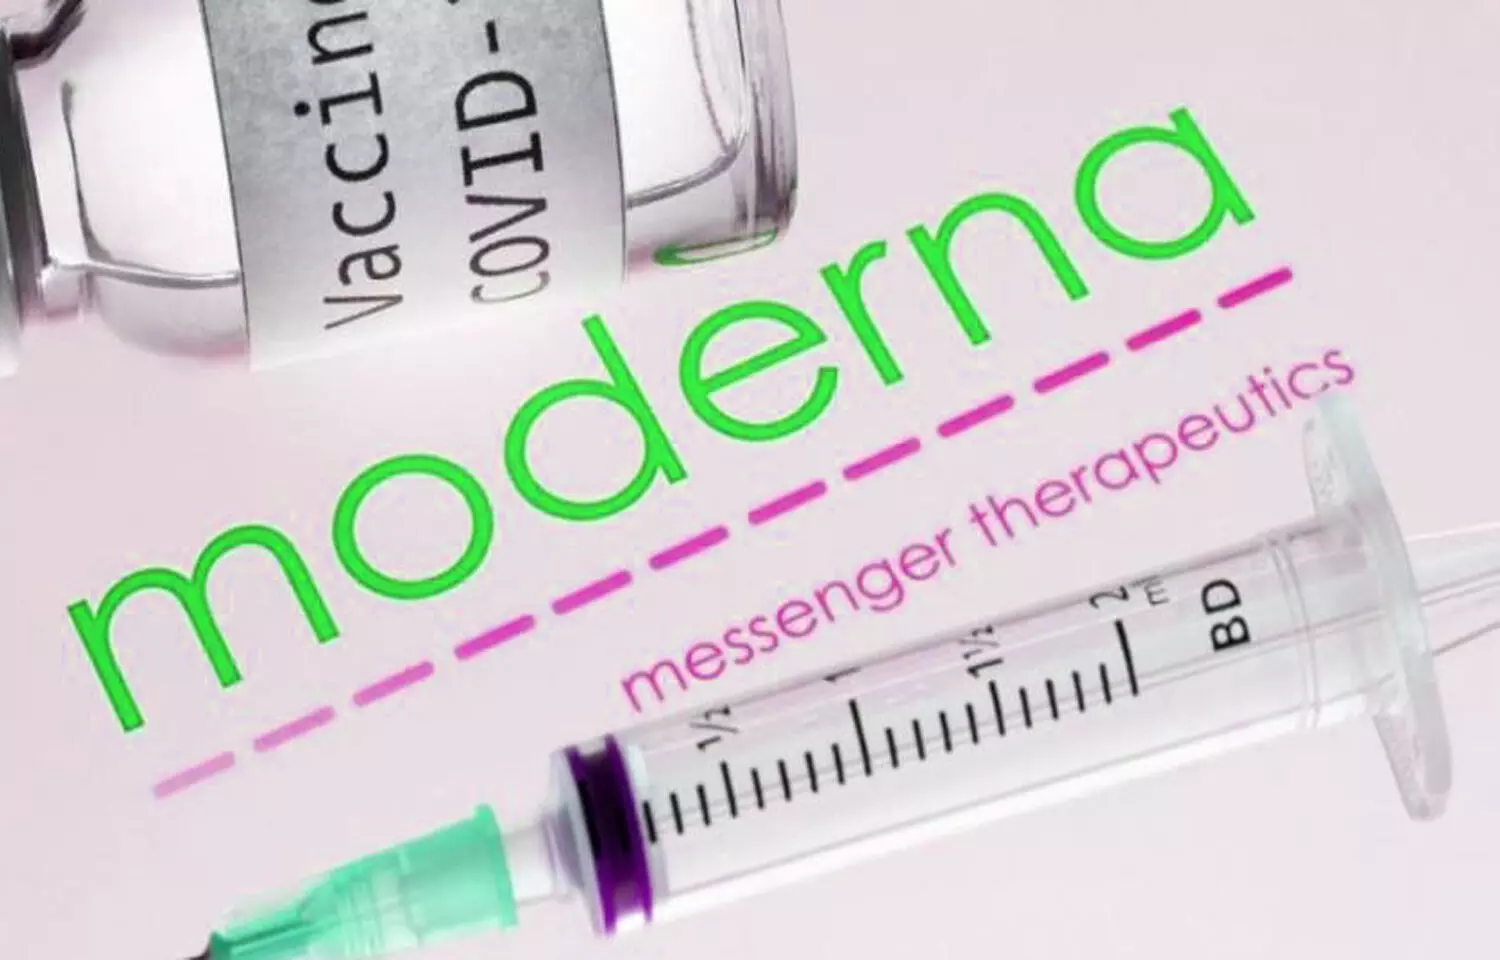 Working with Moderna to make its Covid-19 vaccine available in India, says Govt